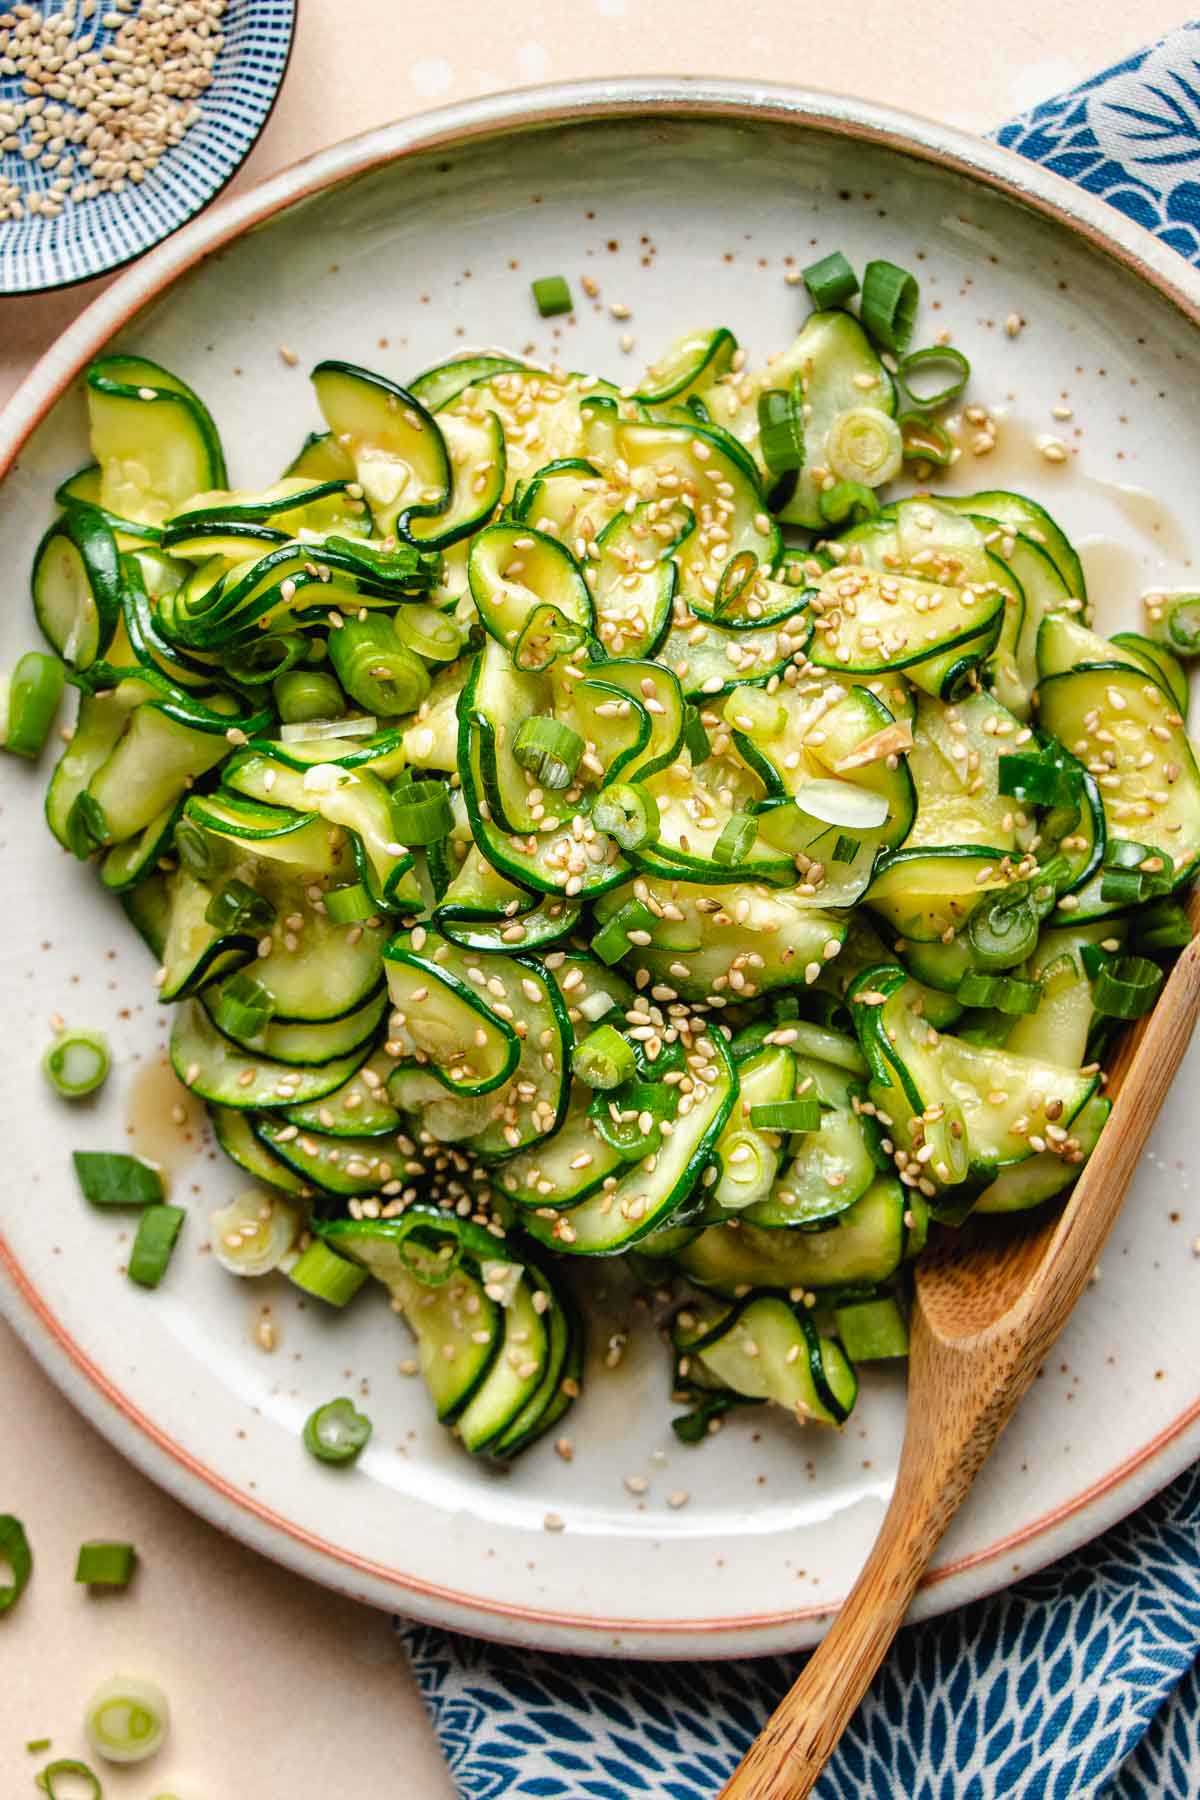 Asian Zucchini Recipes: Taste the Flavorful Delights